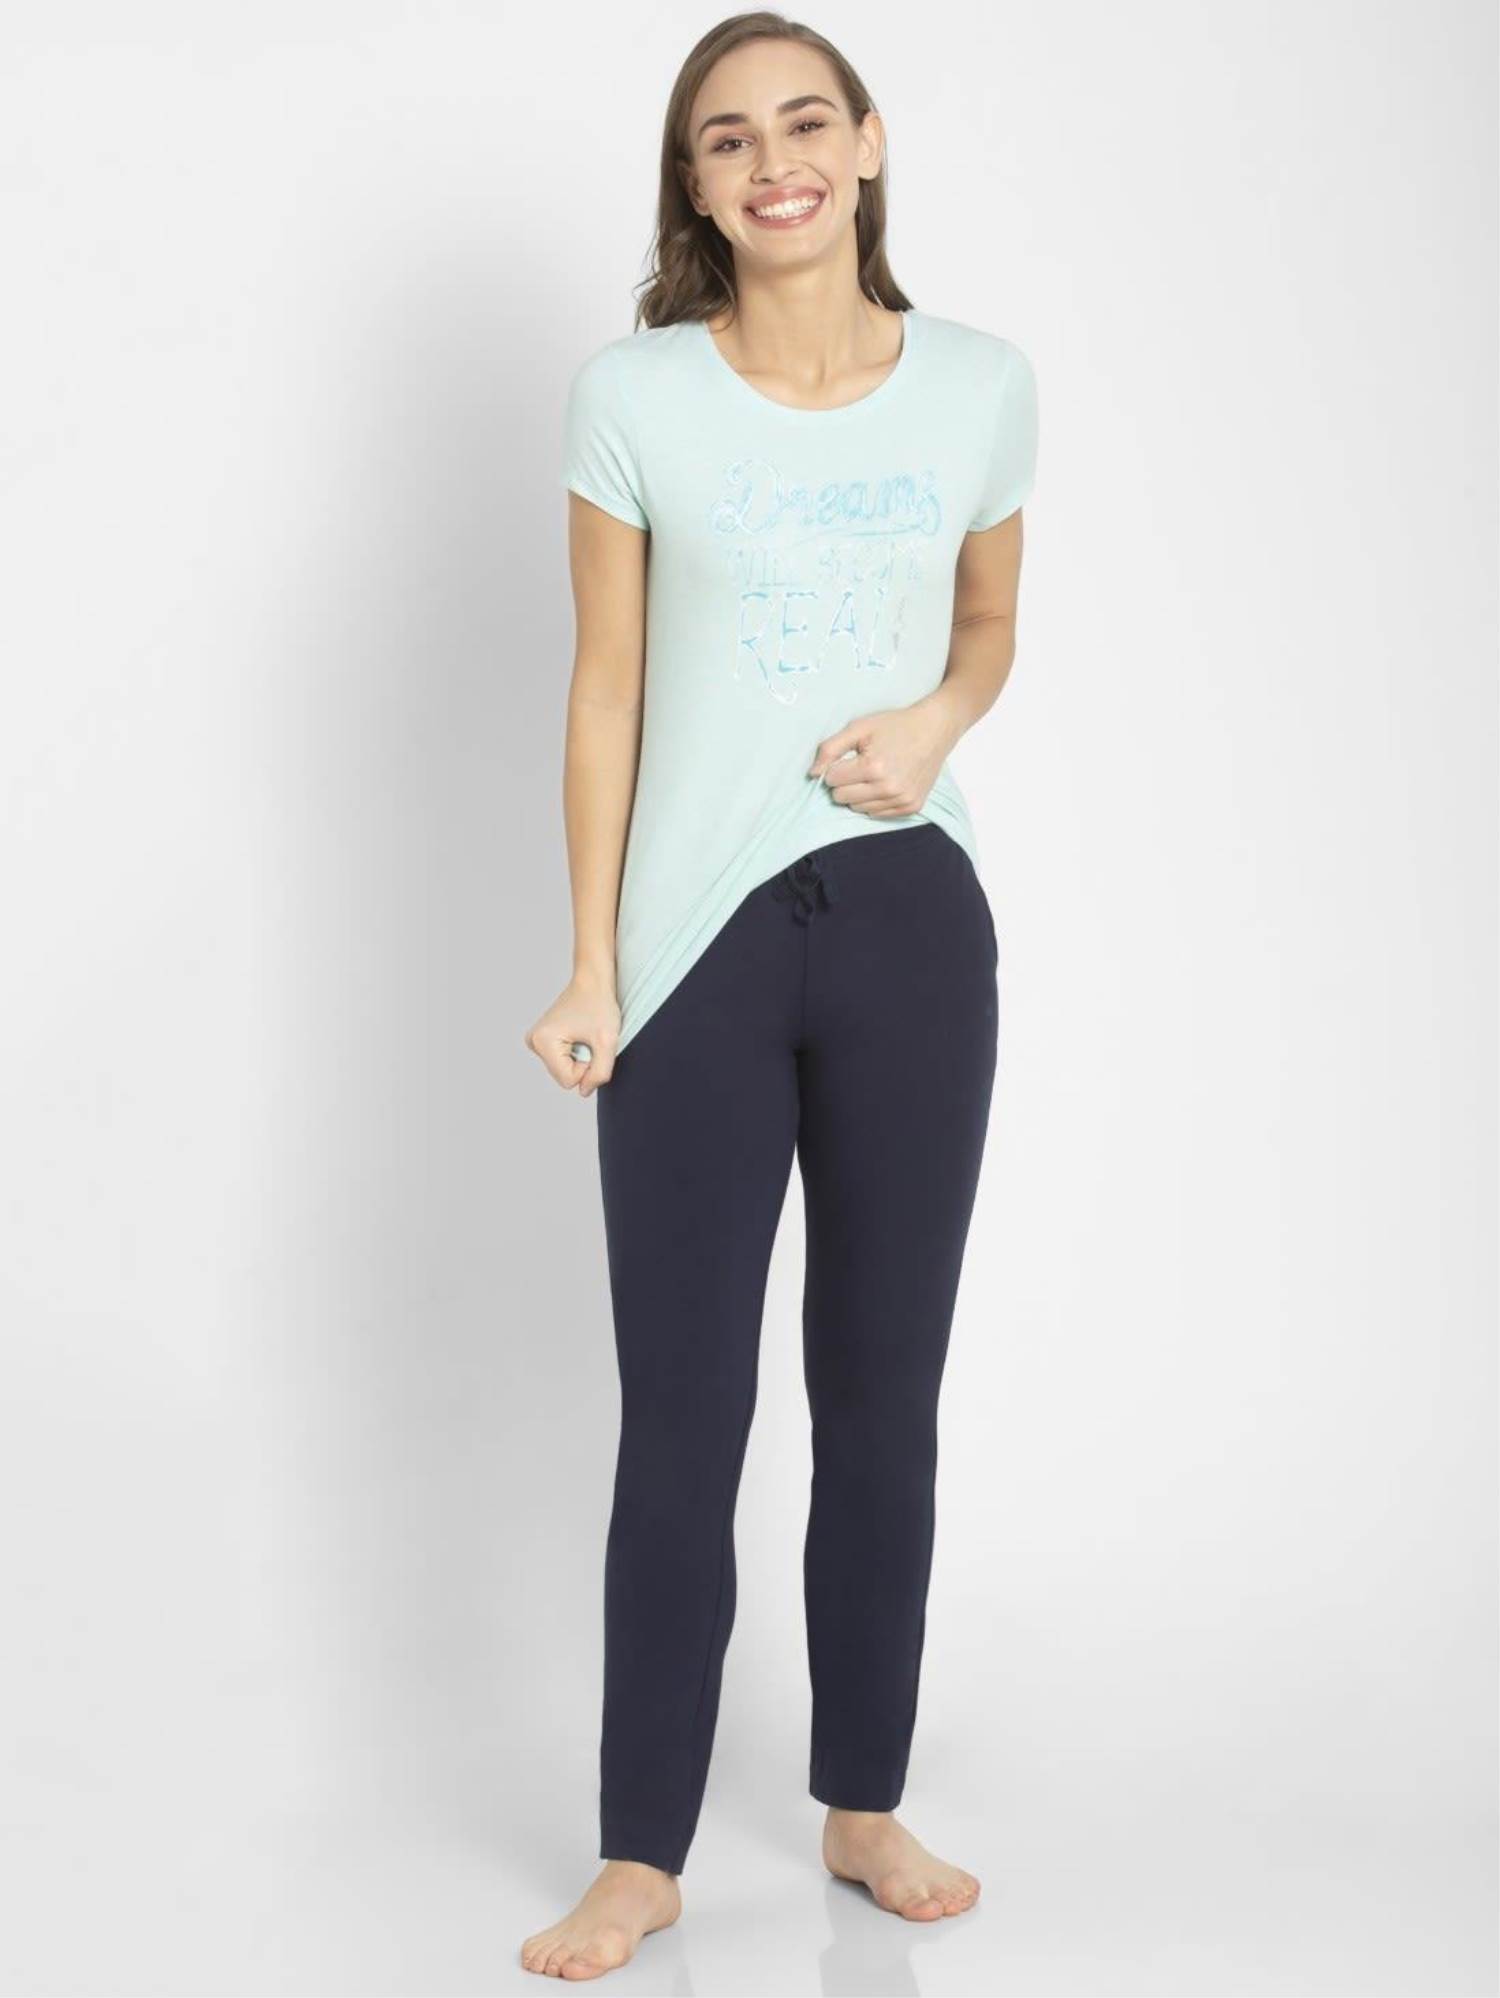 Athleisure All Day Pants for Women: Buy Athleisure Pants for Women Online  at Best Price | Jockey India